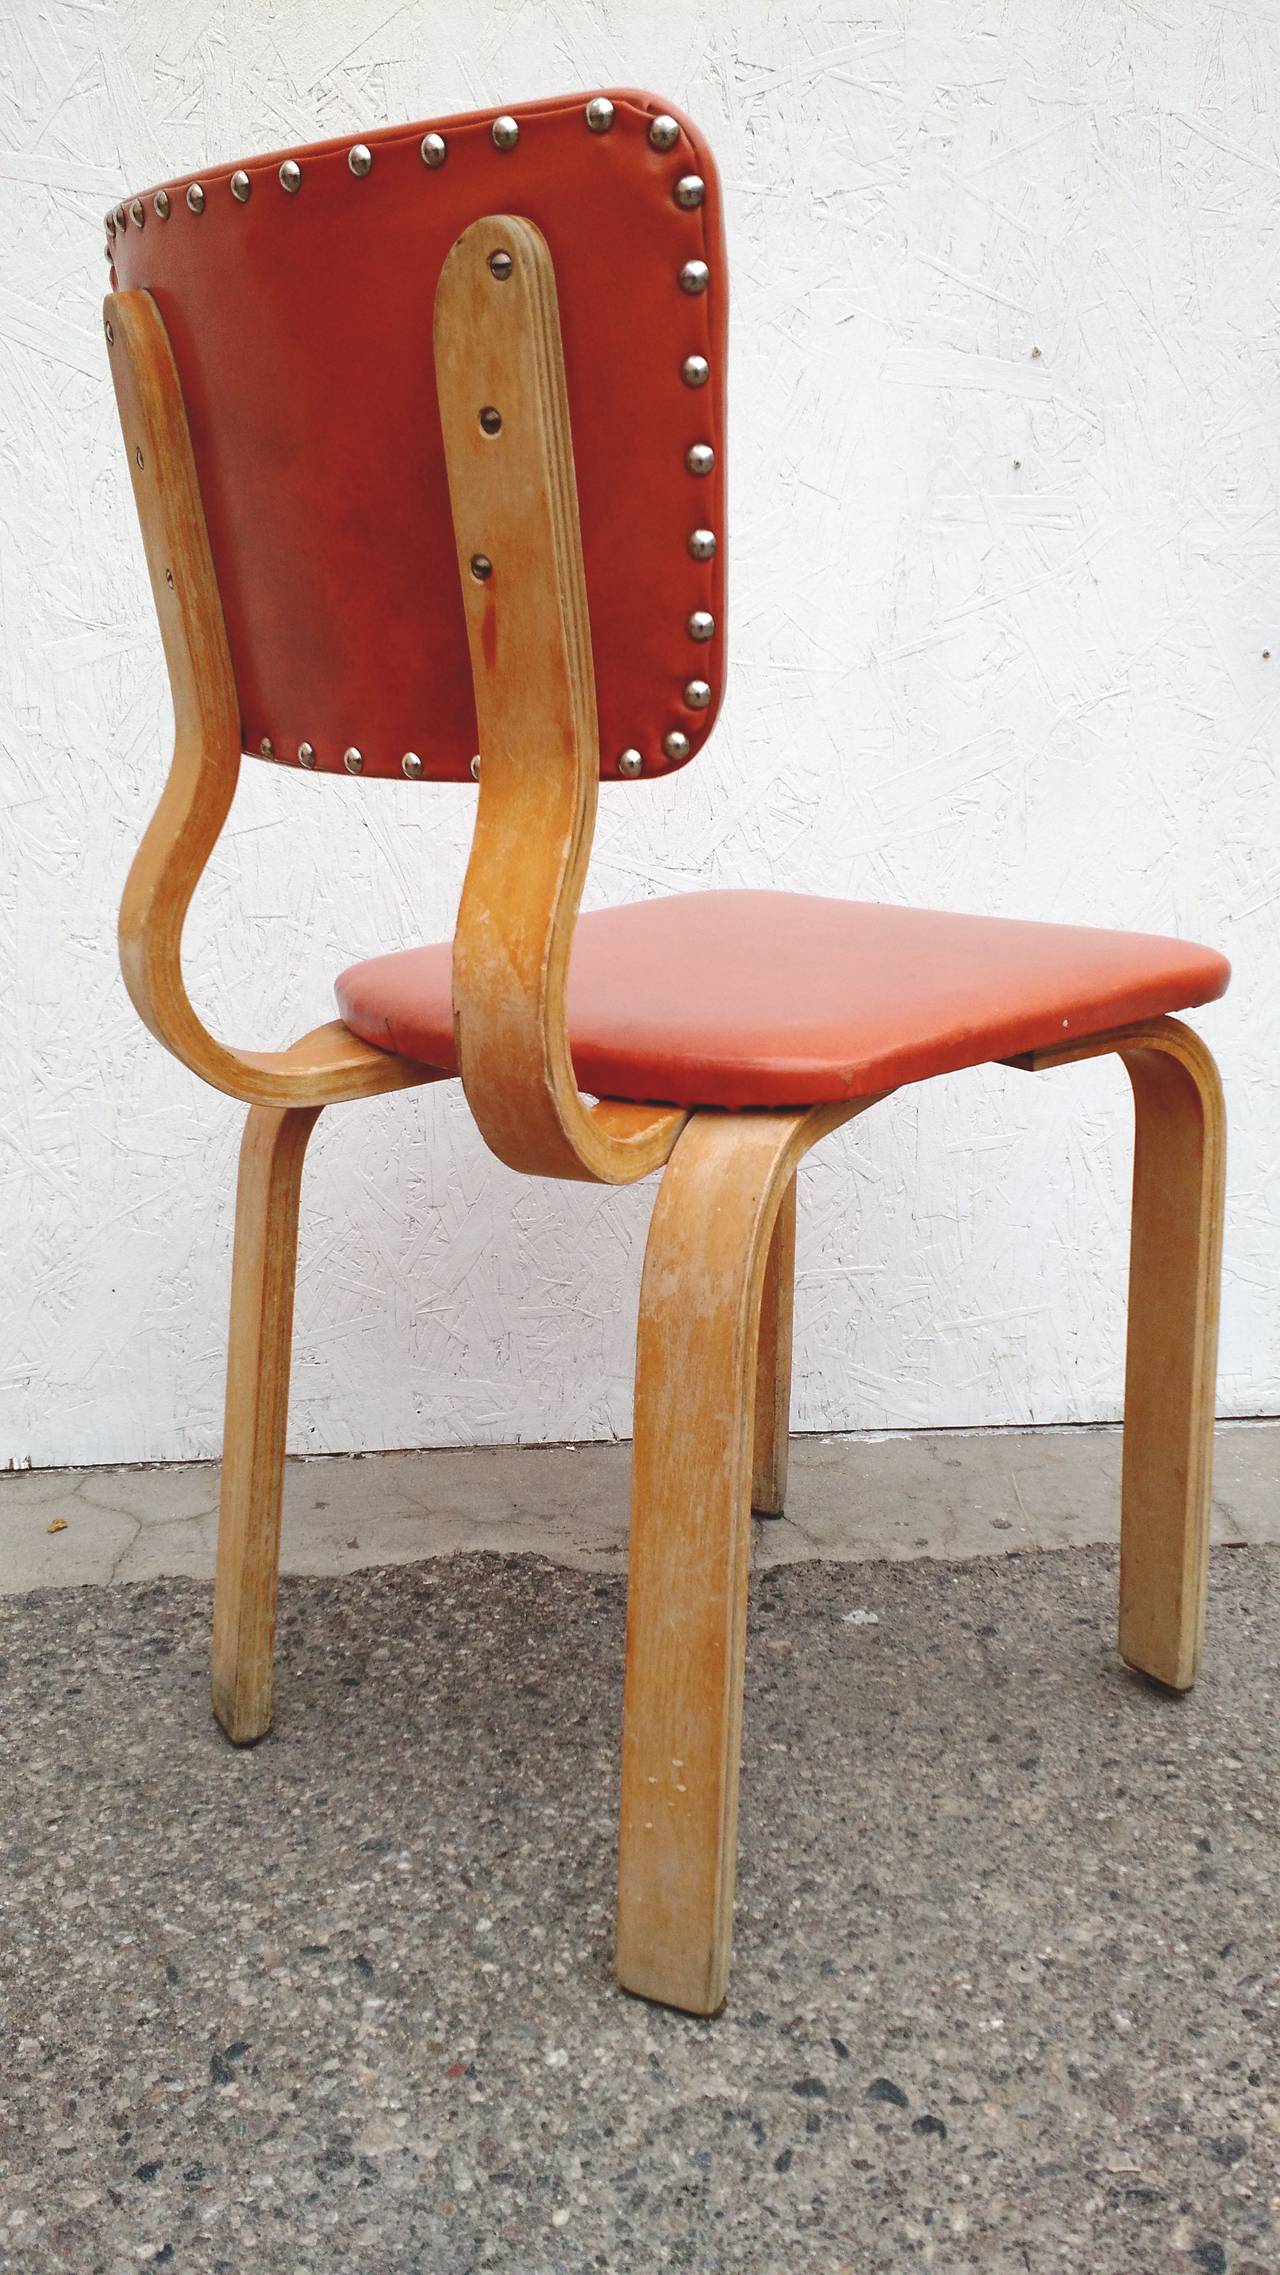 Set of 8 Thonet dining chairs in original condition.
Burnt orange vinyl with nickel nailhead trim.
Worn and stained but structurally solid with no structural repairs.
These are very early examples of this design.
Originally from the Sands Hotel